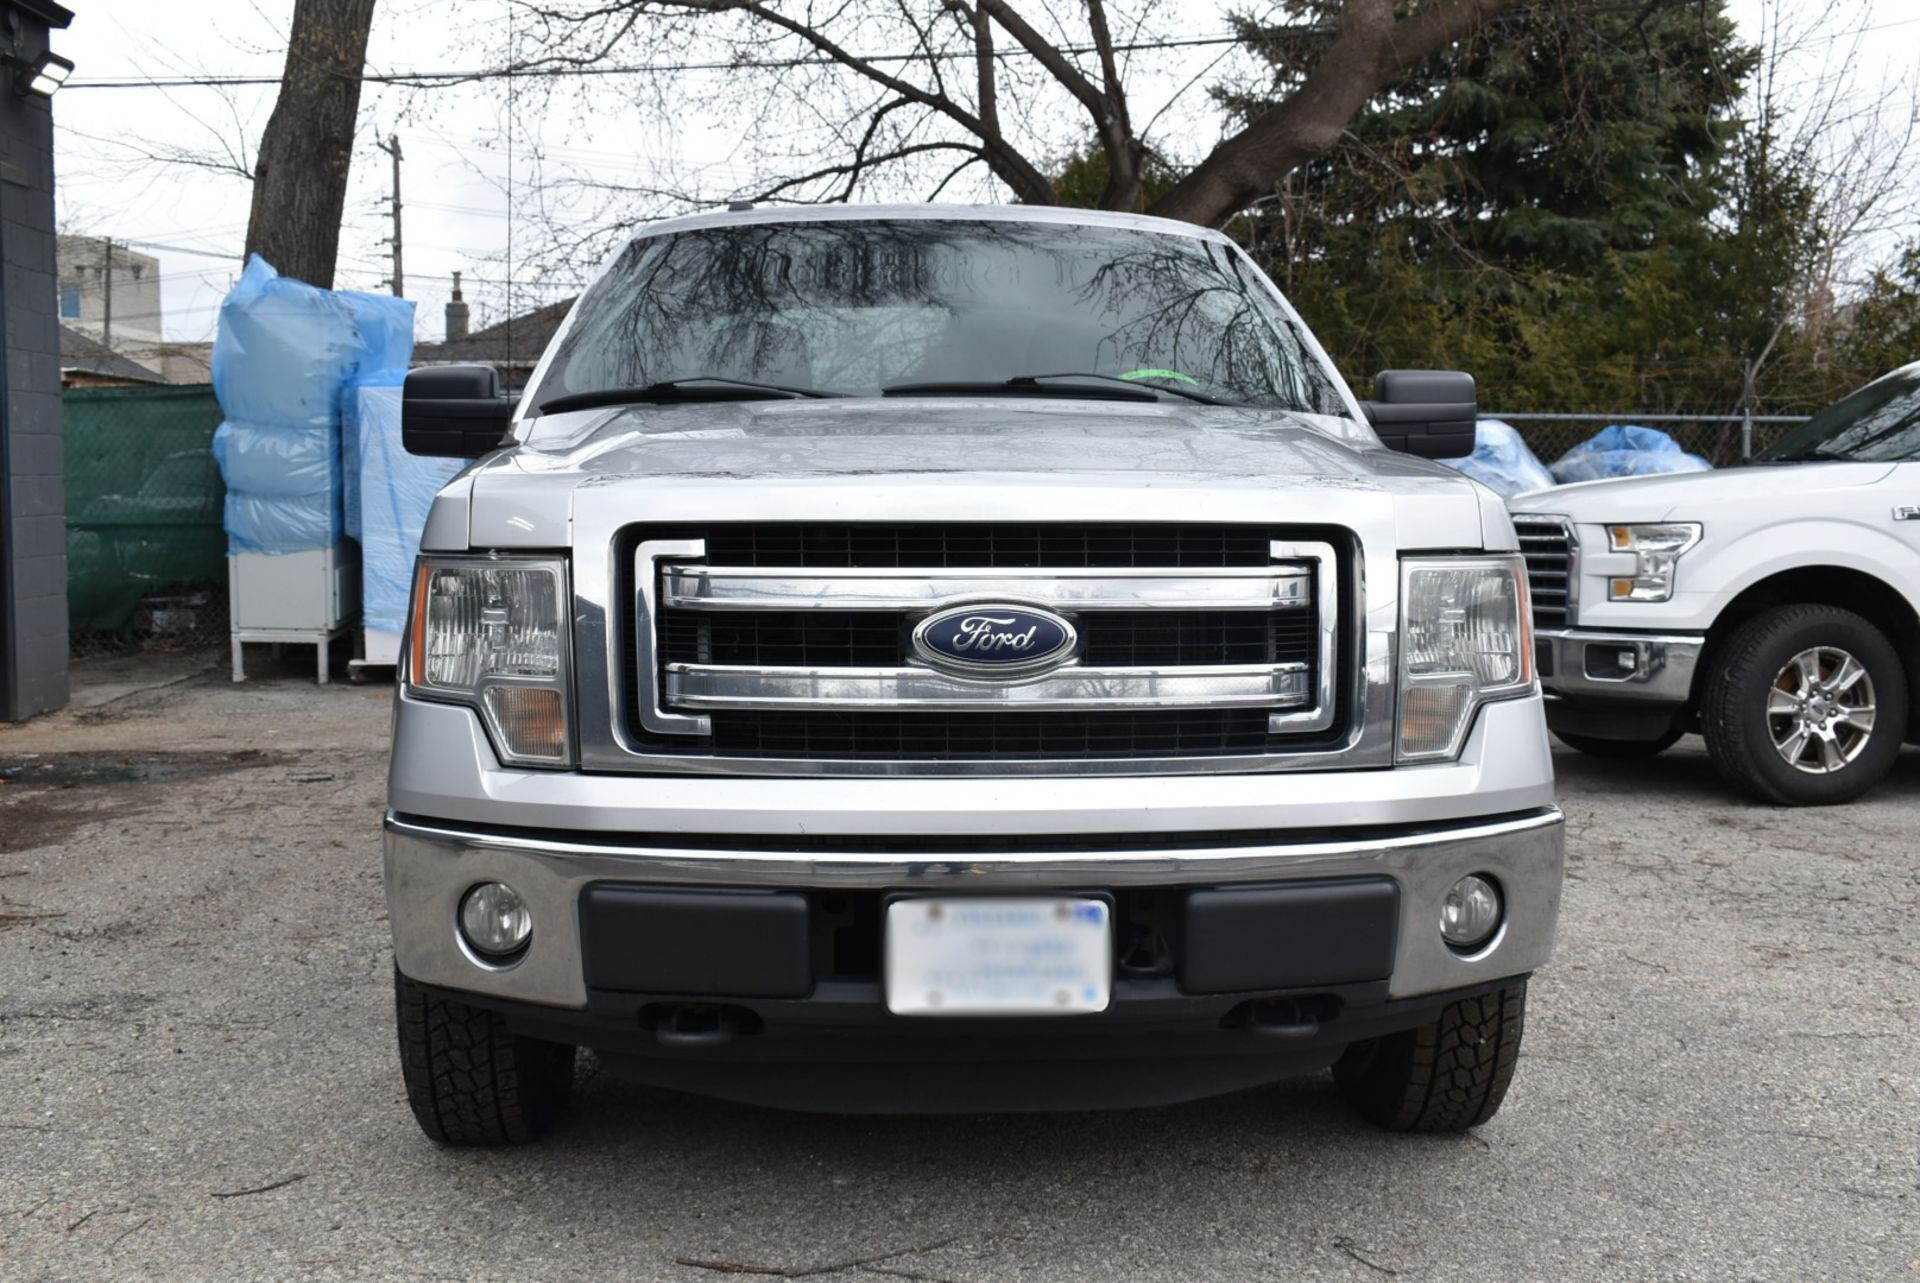 FORD (2014) F150XLT EXTENDED CAB PICKUP TRUCK WITH 3.7 LITER V6 ENGINE, 4X4, AUTO TRANSMISSION, - Image 6 of 13